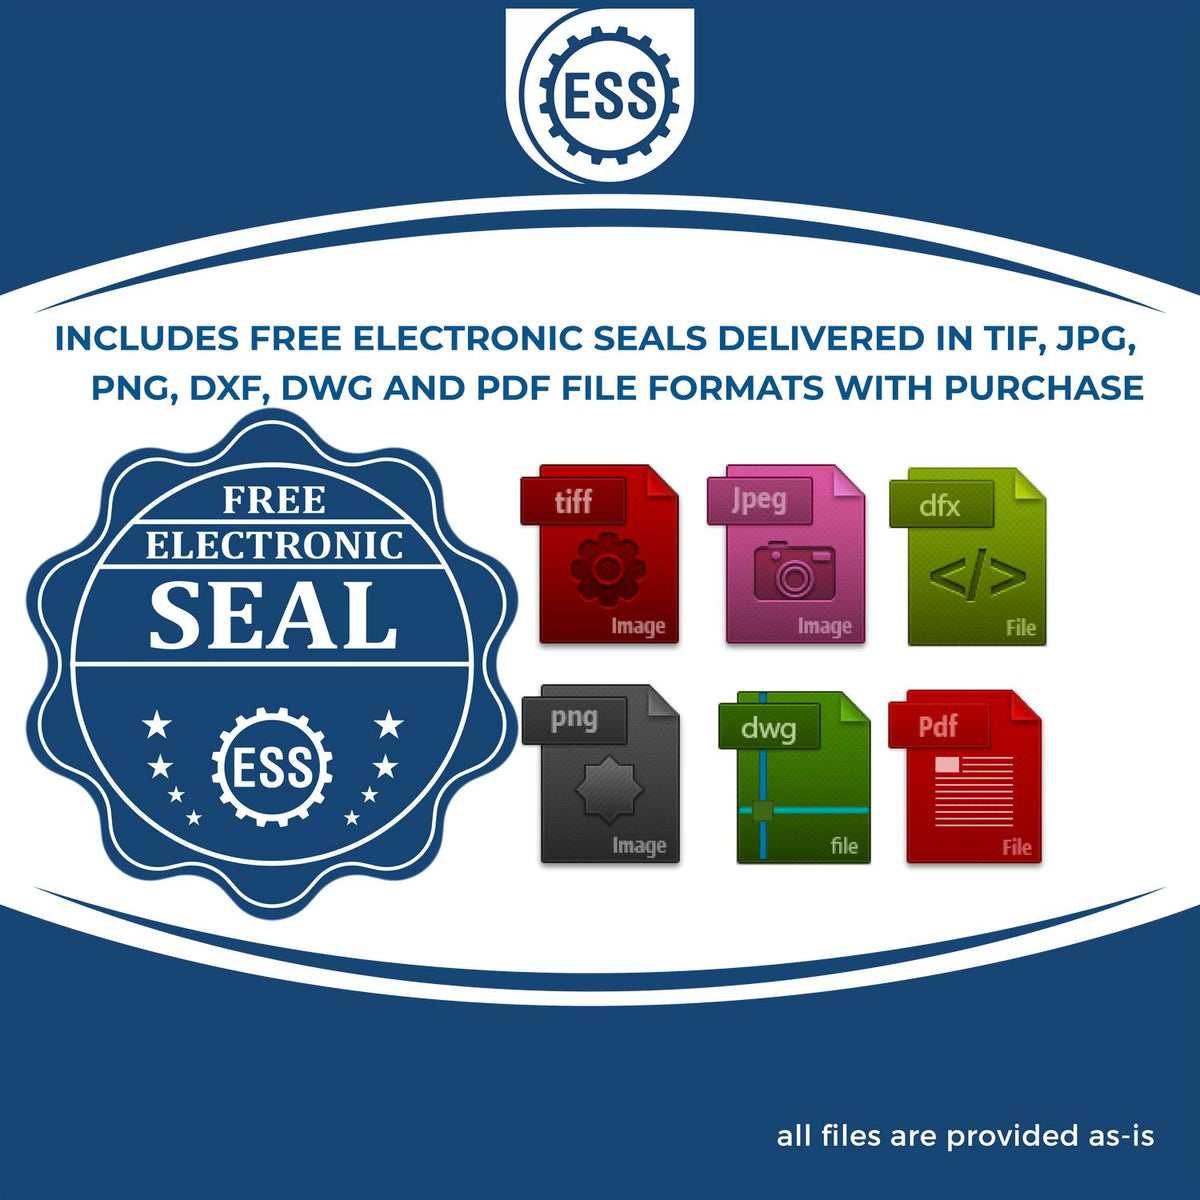 An infographic for the free electronic seal for the Heavy Duty Cast Iron Massachusetts Geologist Seal Embosser illustrating the different file type icons such as DXF, DWG, TIF, JPG and PNG.